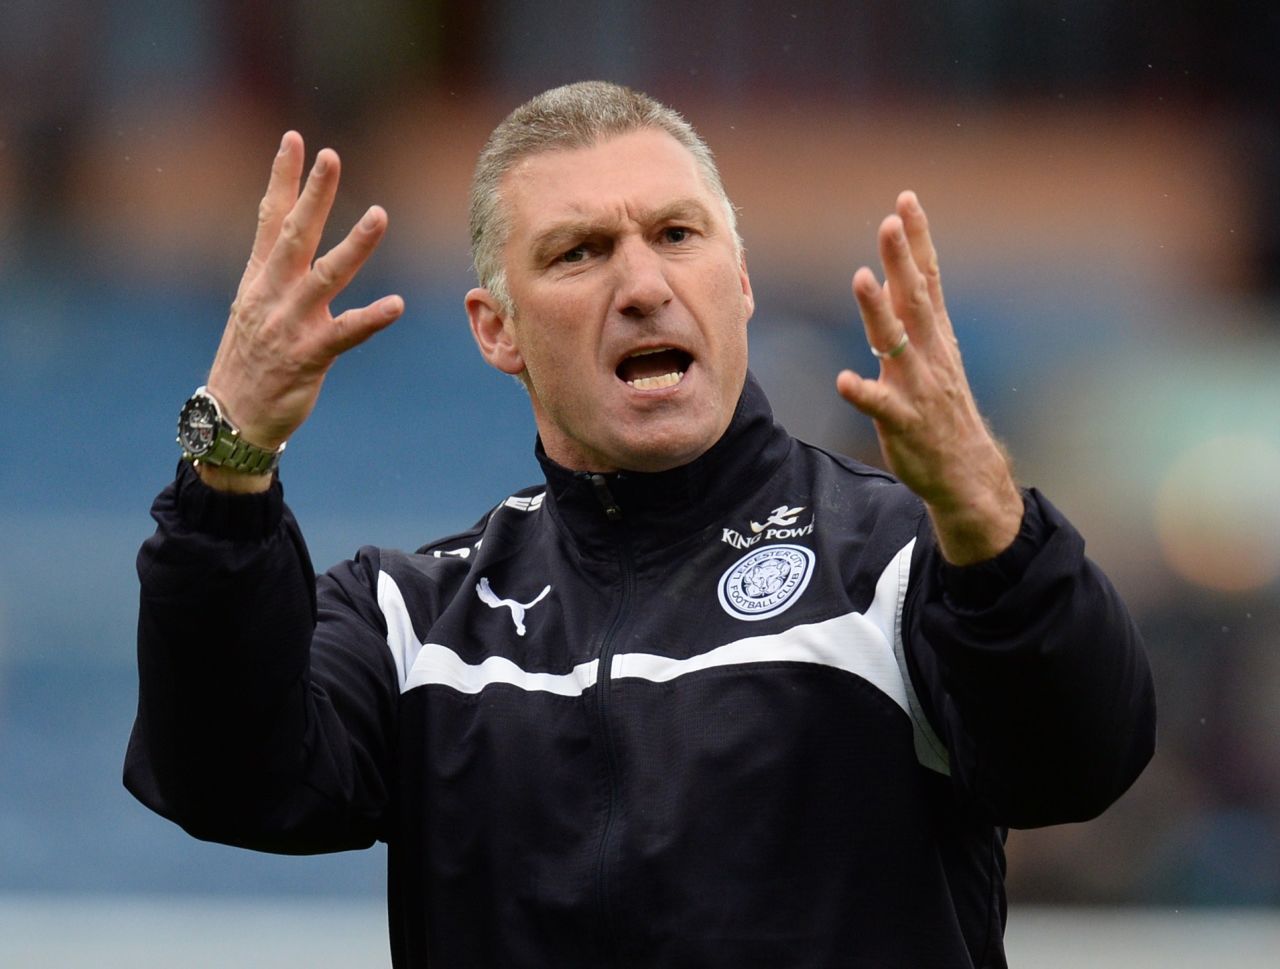 Nigel Pearson has been sacked as manager of Leicester City. Pearson, whose side won seven of its final nine English Premier League games to escape relegation, was relieved of his duties after the board cited "fundamental differences in perspective" between the manager and club's owner.